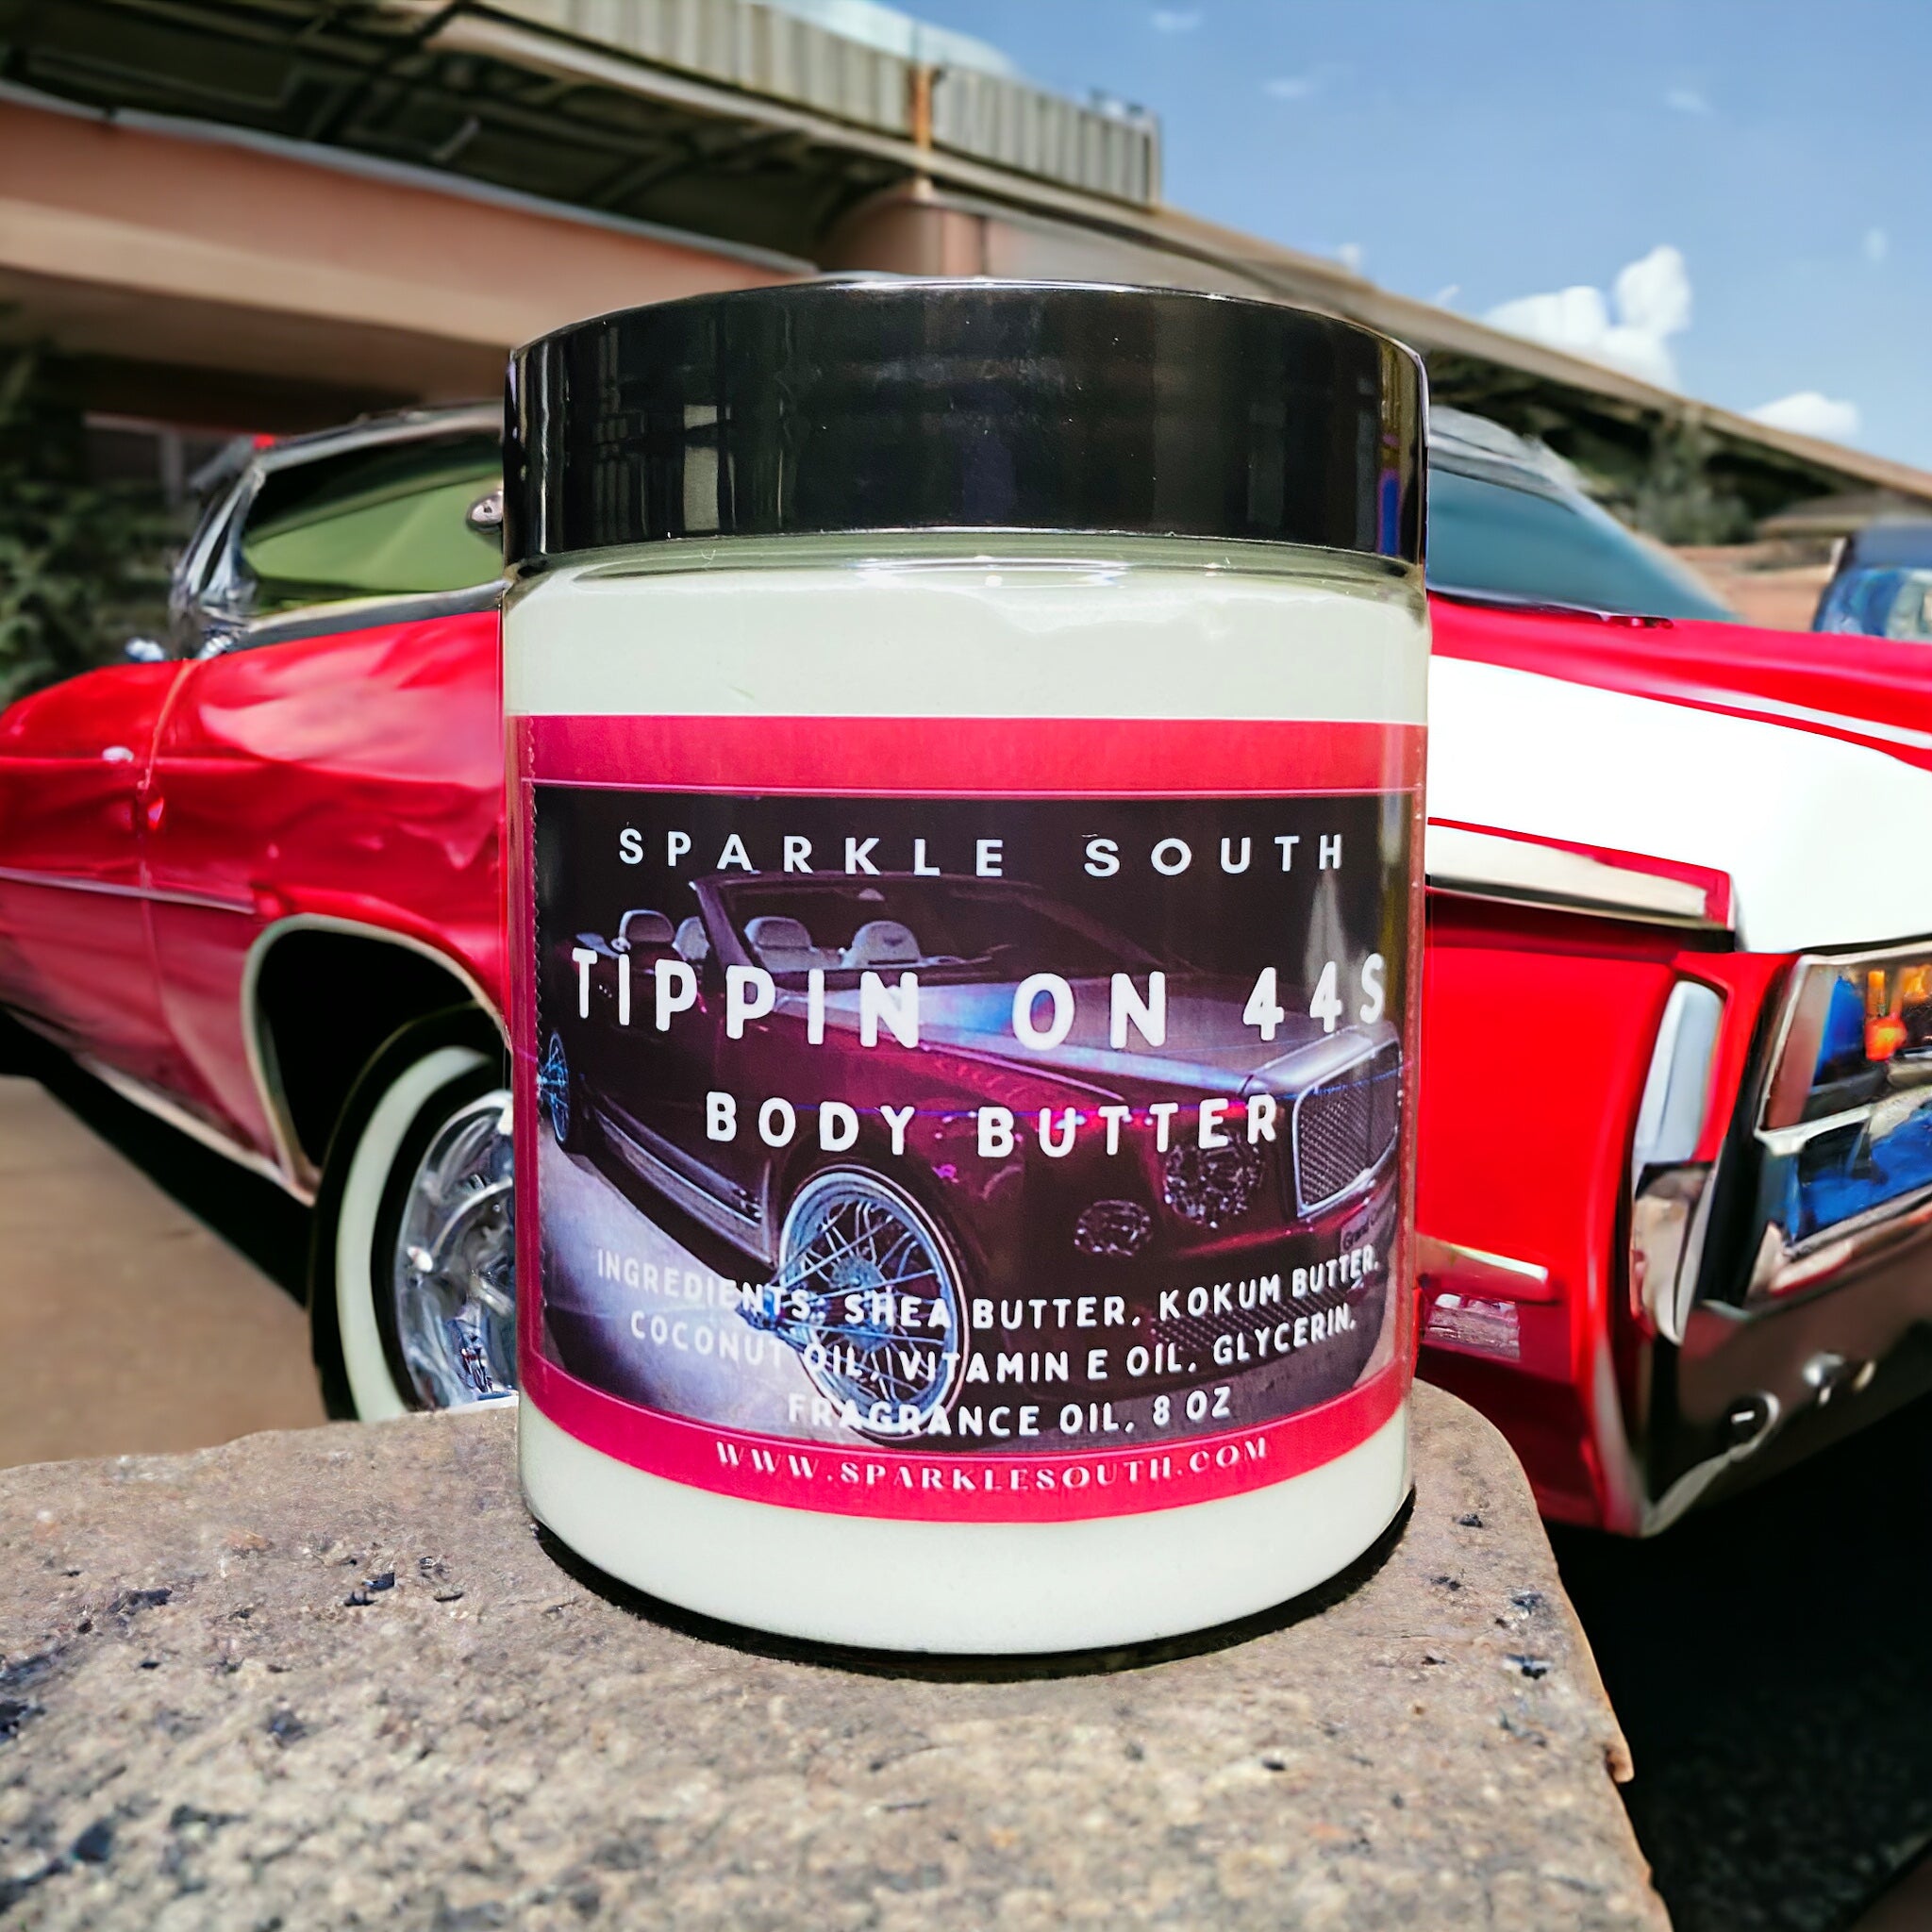 Tippin on 44s Body Butter